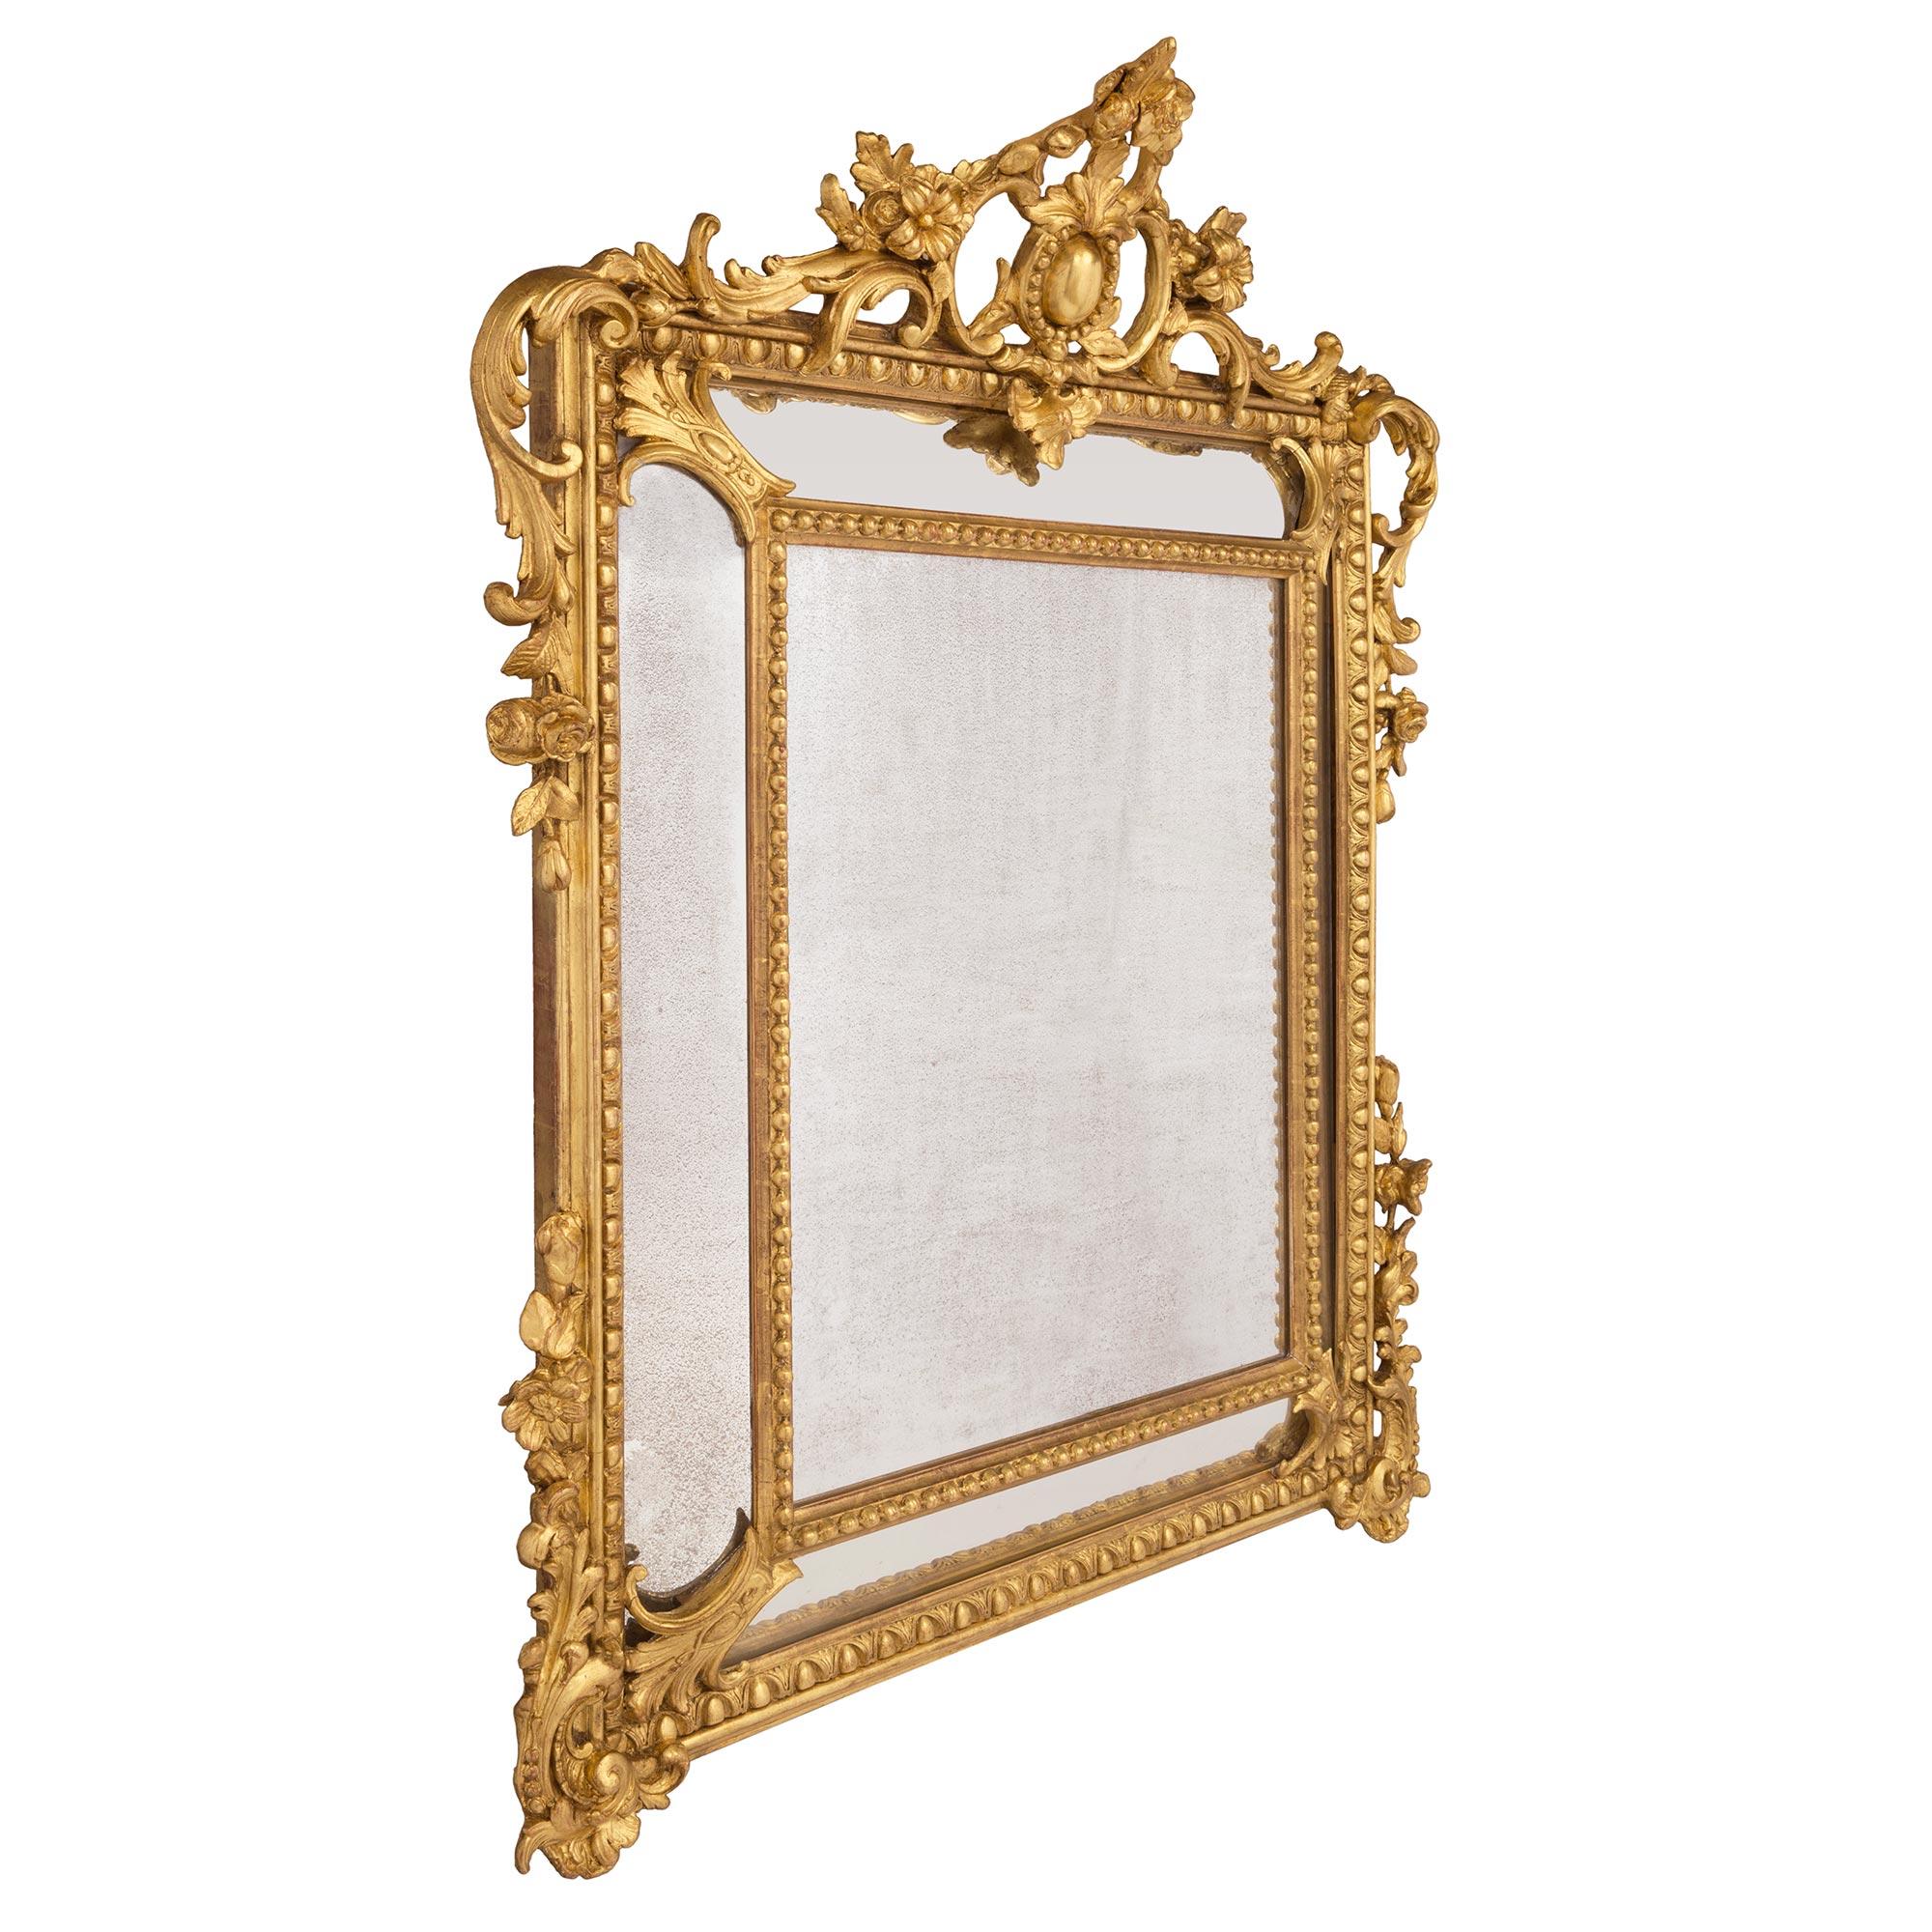 A striking French 19th century Louis XV st. double framed giltwood mirror. The original central mirror plate and four outer mirror plates are each framed within a fine beaded and Les Oves border. At each corner are lovely floral reserves and